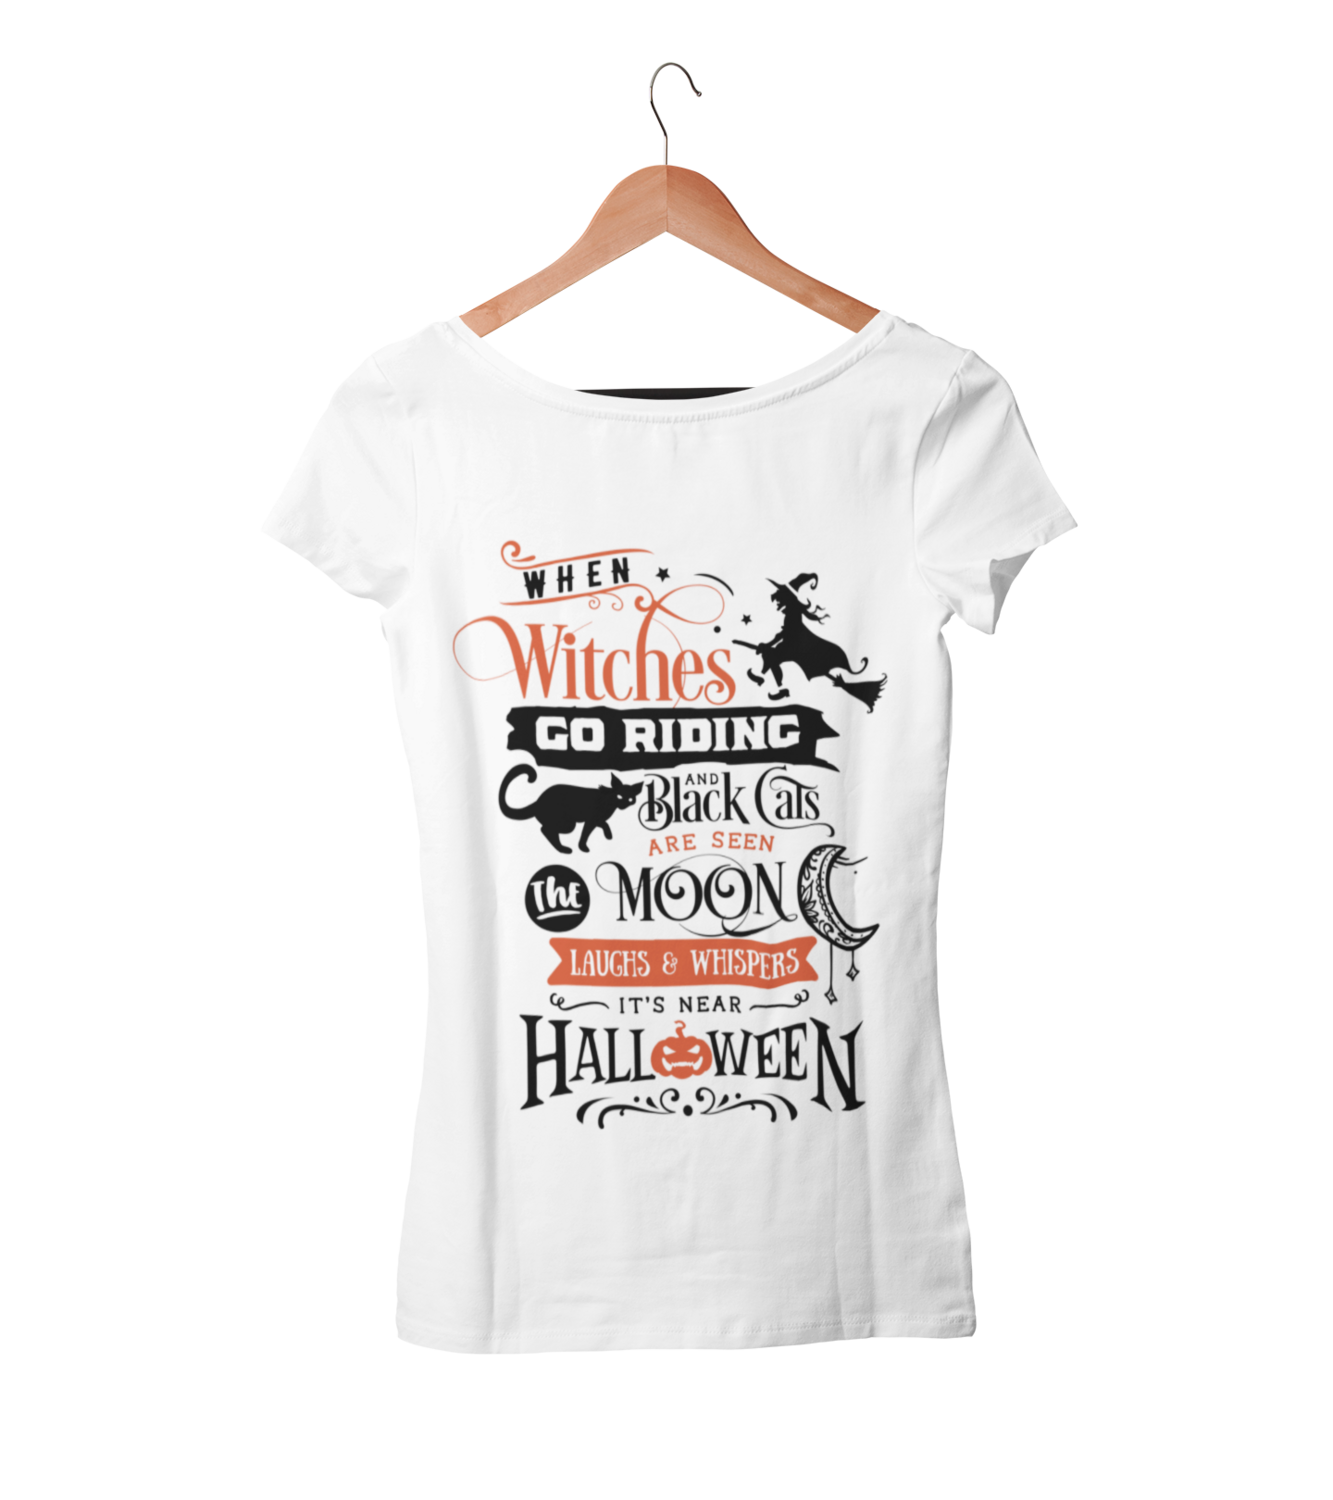 WHEN WITCHES GO RIDING T-SHIRT WOMAN